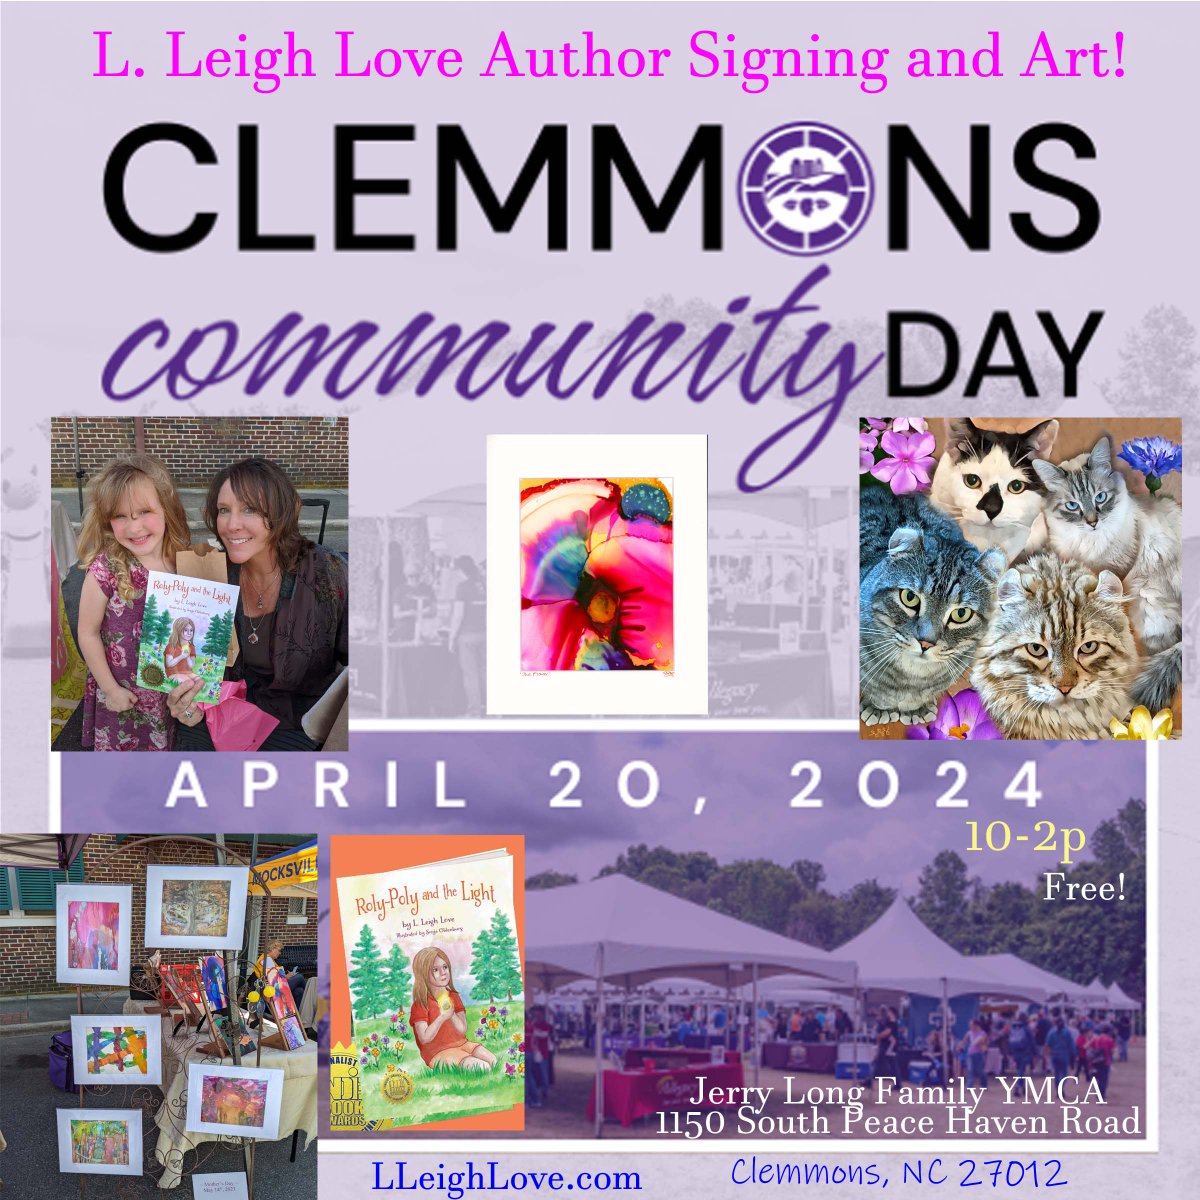 Clemmons Community Day!

Music, Food, Fun, Art and Books. What more could you want?

Free bookmarks? Ok, sure. 

#BooksWorthReading, #WritingCommunity, #SupportLocal, #indieauthors,#SupportLocalArtists